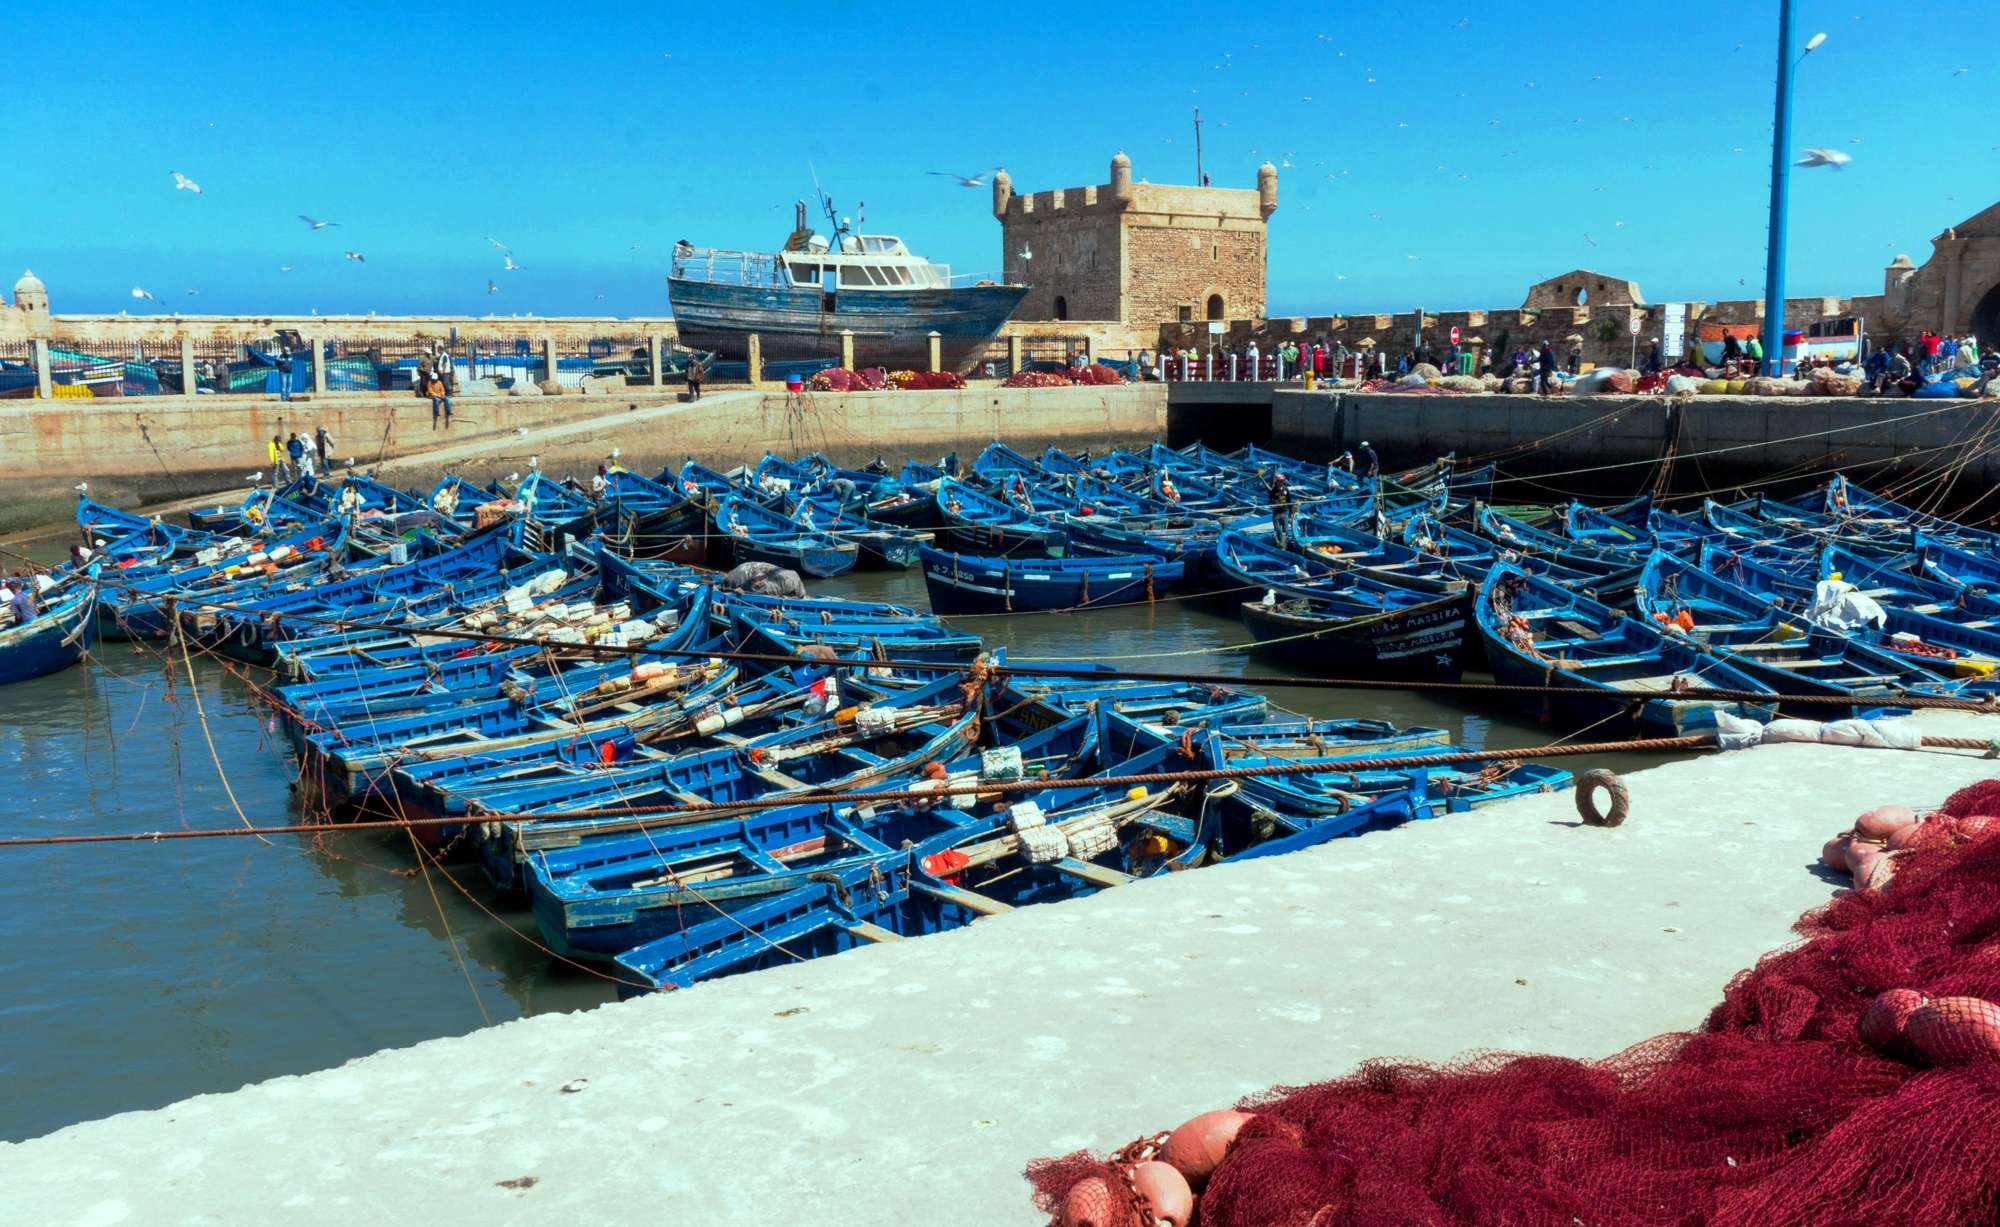 13 days exclusive Morocco packaged tour from Casablanca to discover the real Morocco